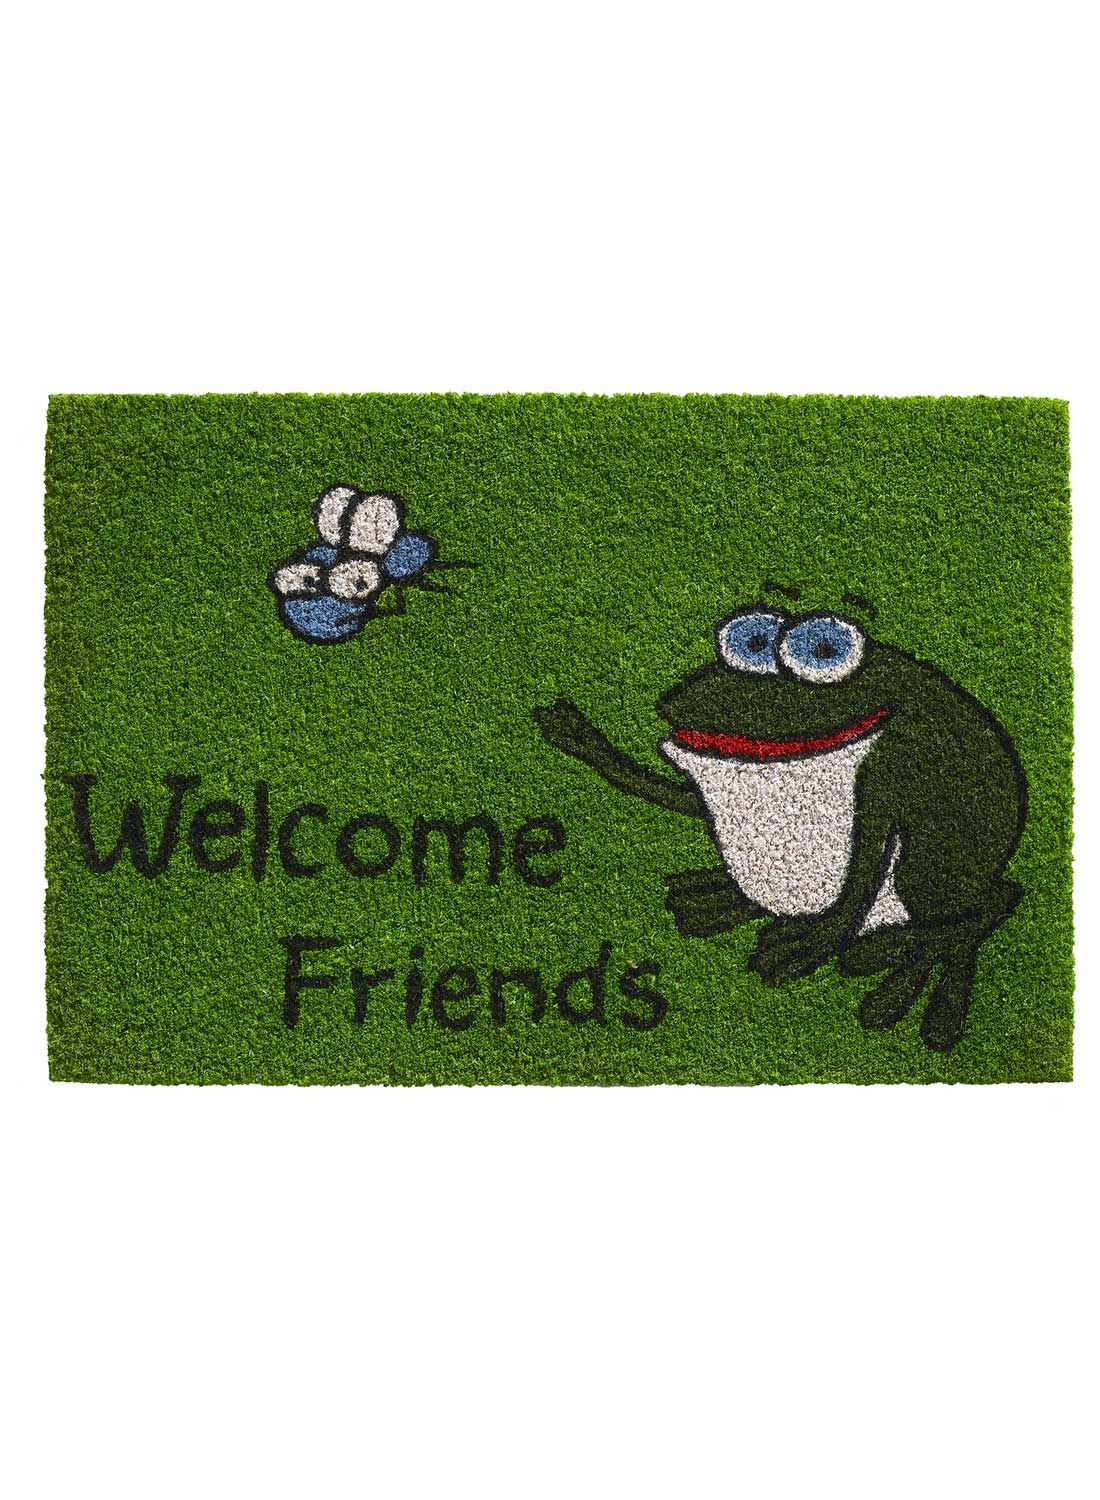 COCO WELCOME FRIENDS FROG